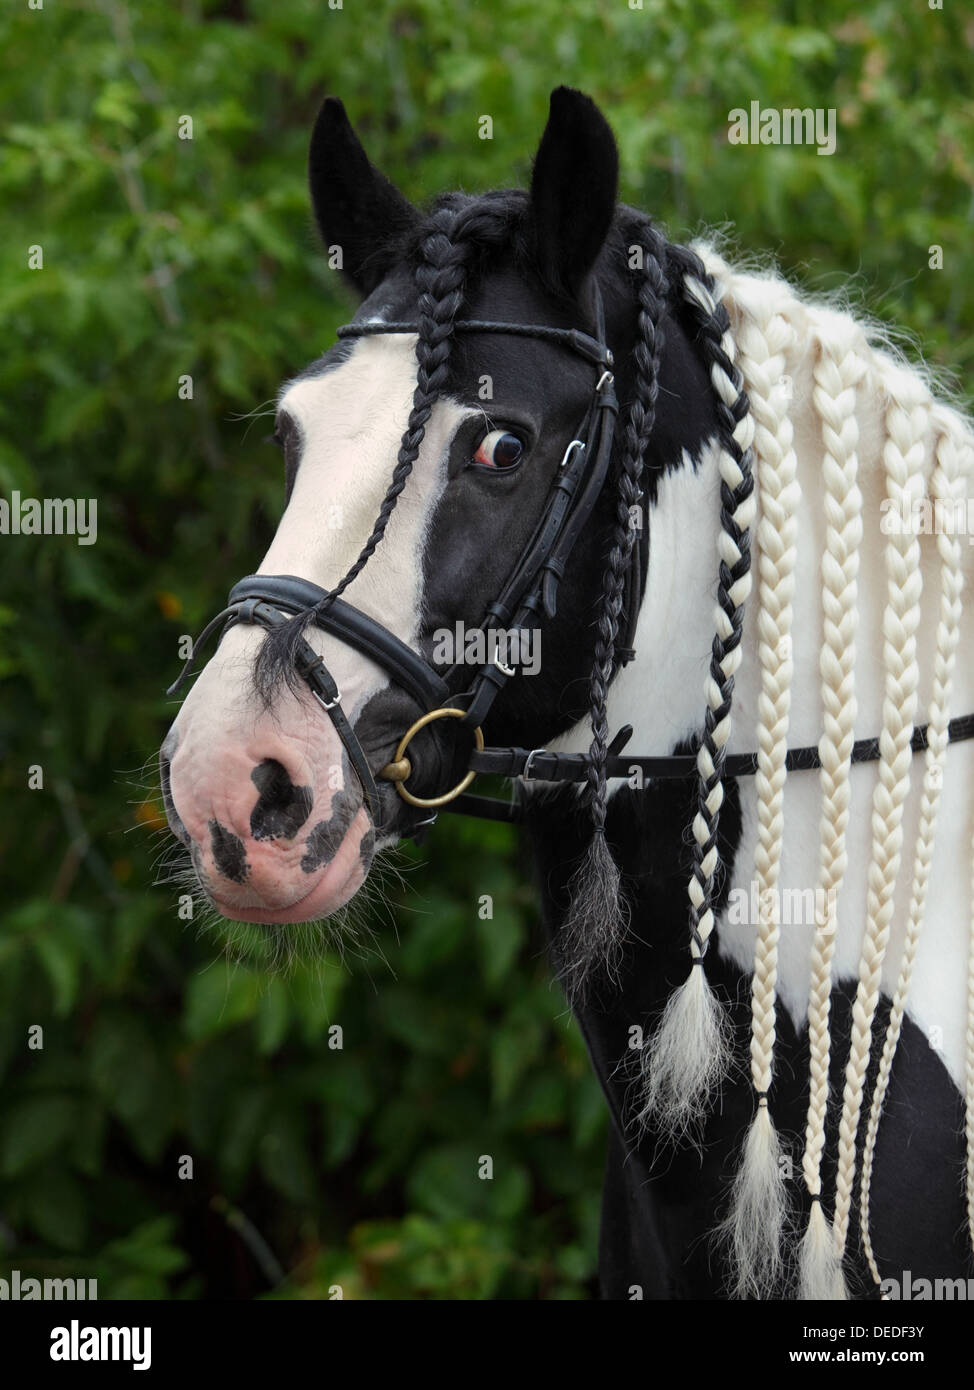 Tinker pony with a braided mane in pigtails. Gypsy vanner horse stallion Stock Photo